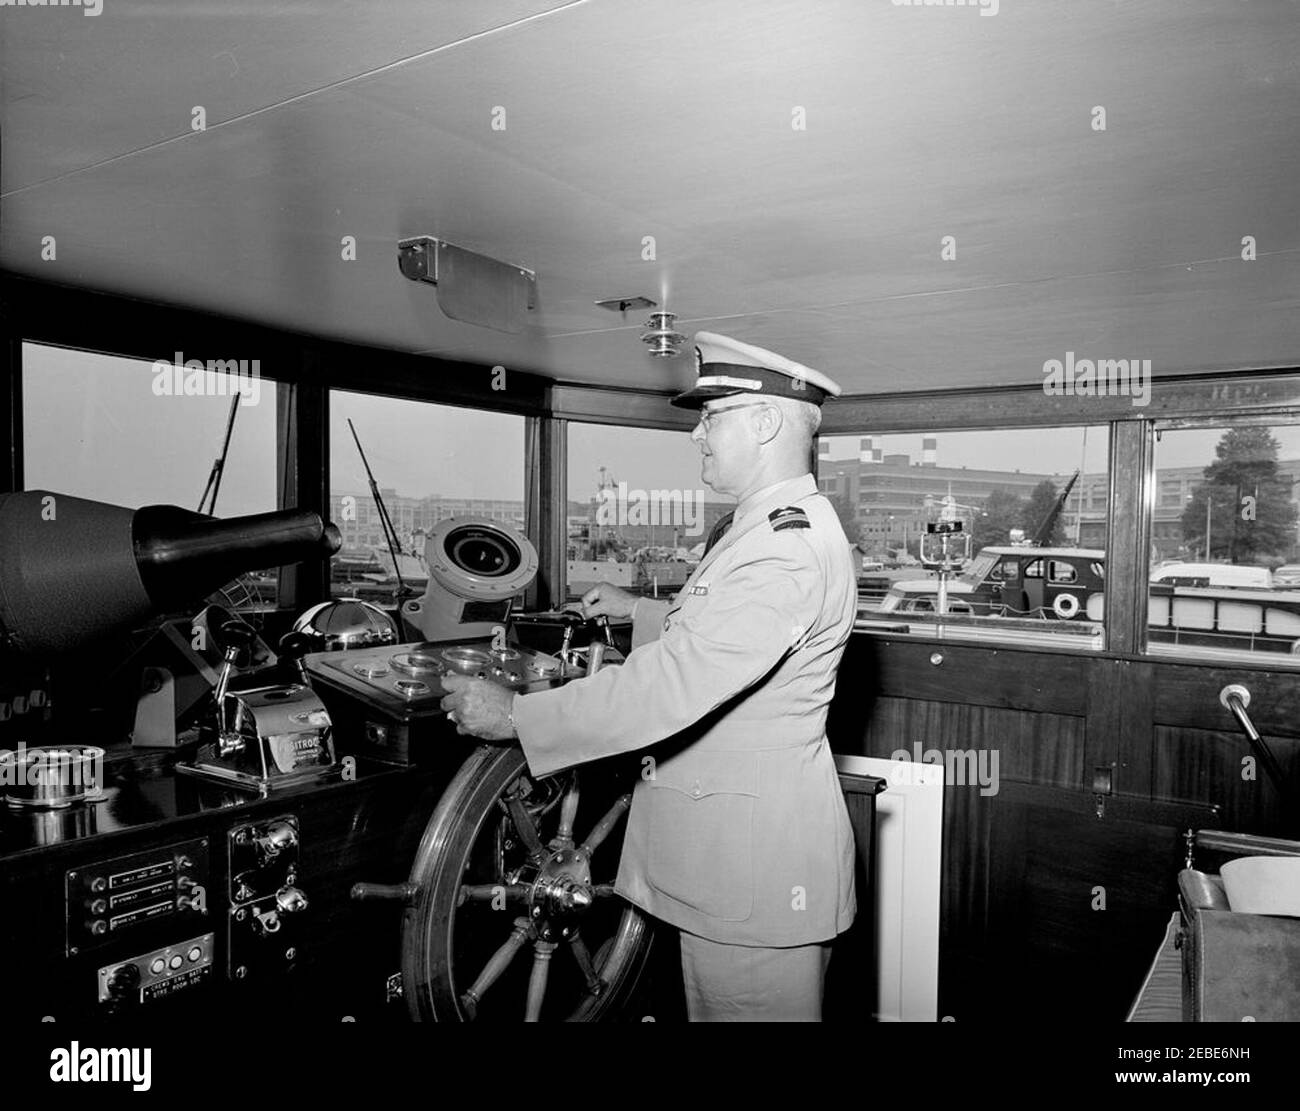 Yacht Honey Fitz berthed at Washington Navy Yard, interior and exterior views. Lieutenant Commander Walter C. Slye stands at the helm in the pilothouse of the Presidential yacht u0022Honey Fitzu0022 at the Washington Navy Yard, Washington, D.C. Stock Photo